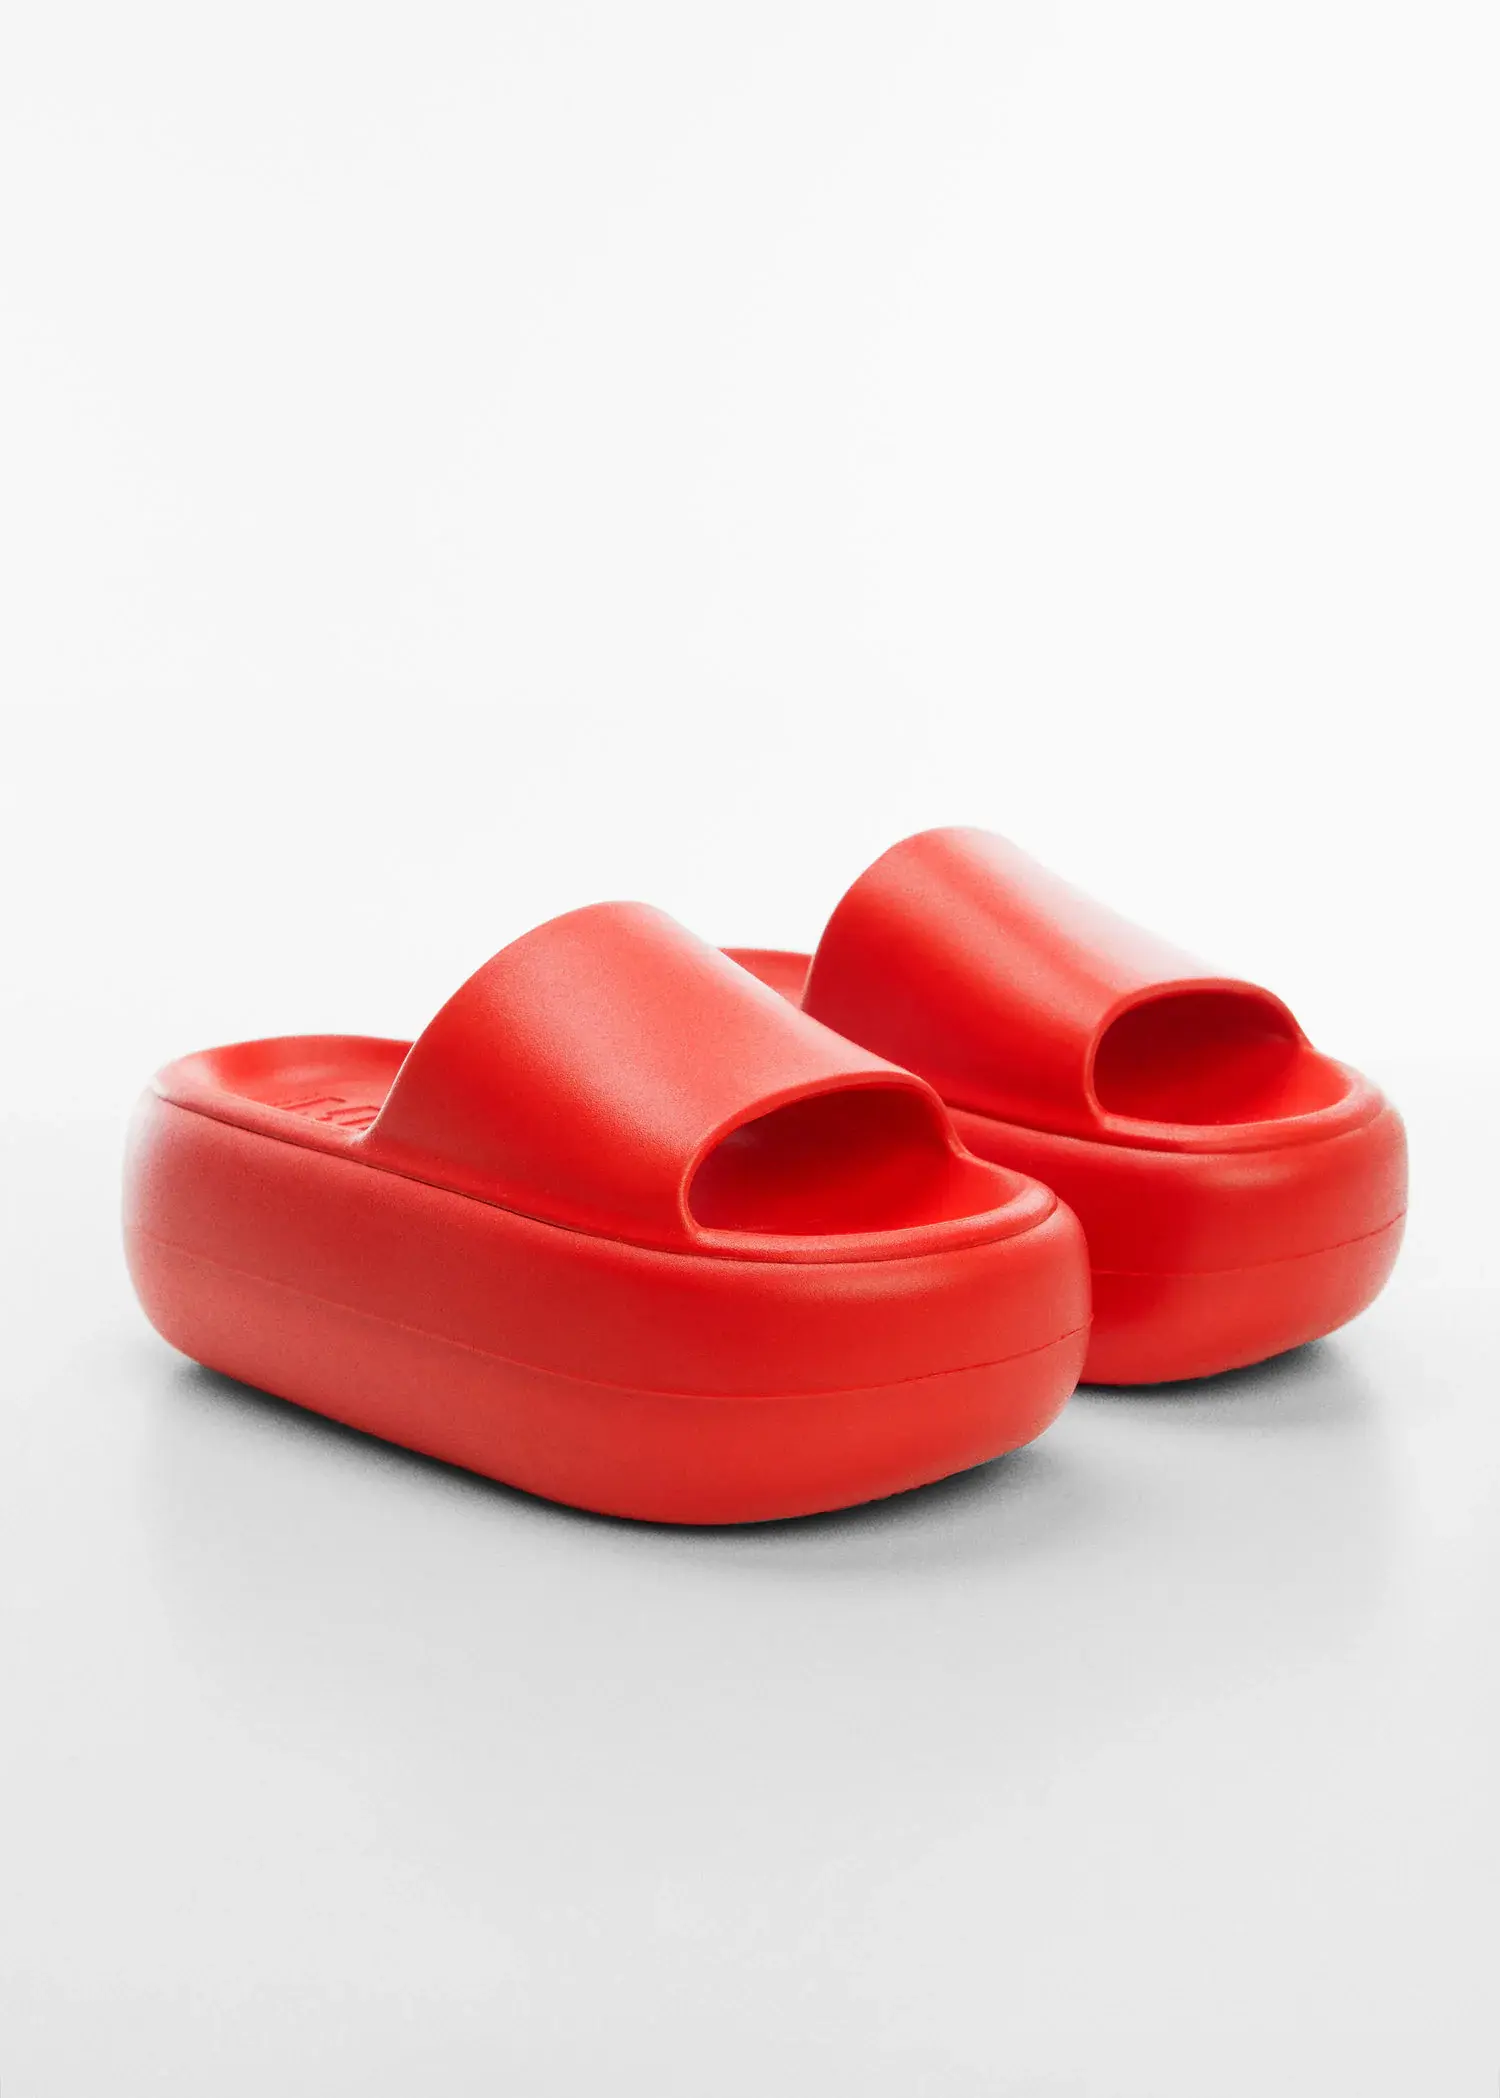 Mango Maxi platform sandals. a pair of red sandals on a white surface. 